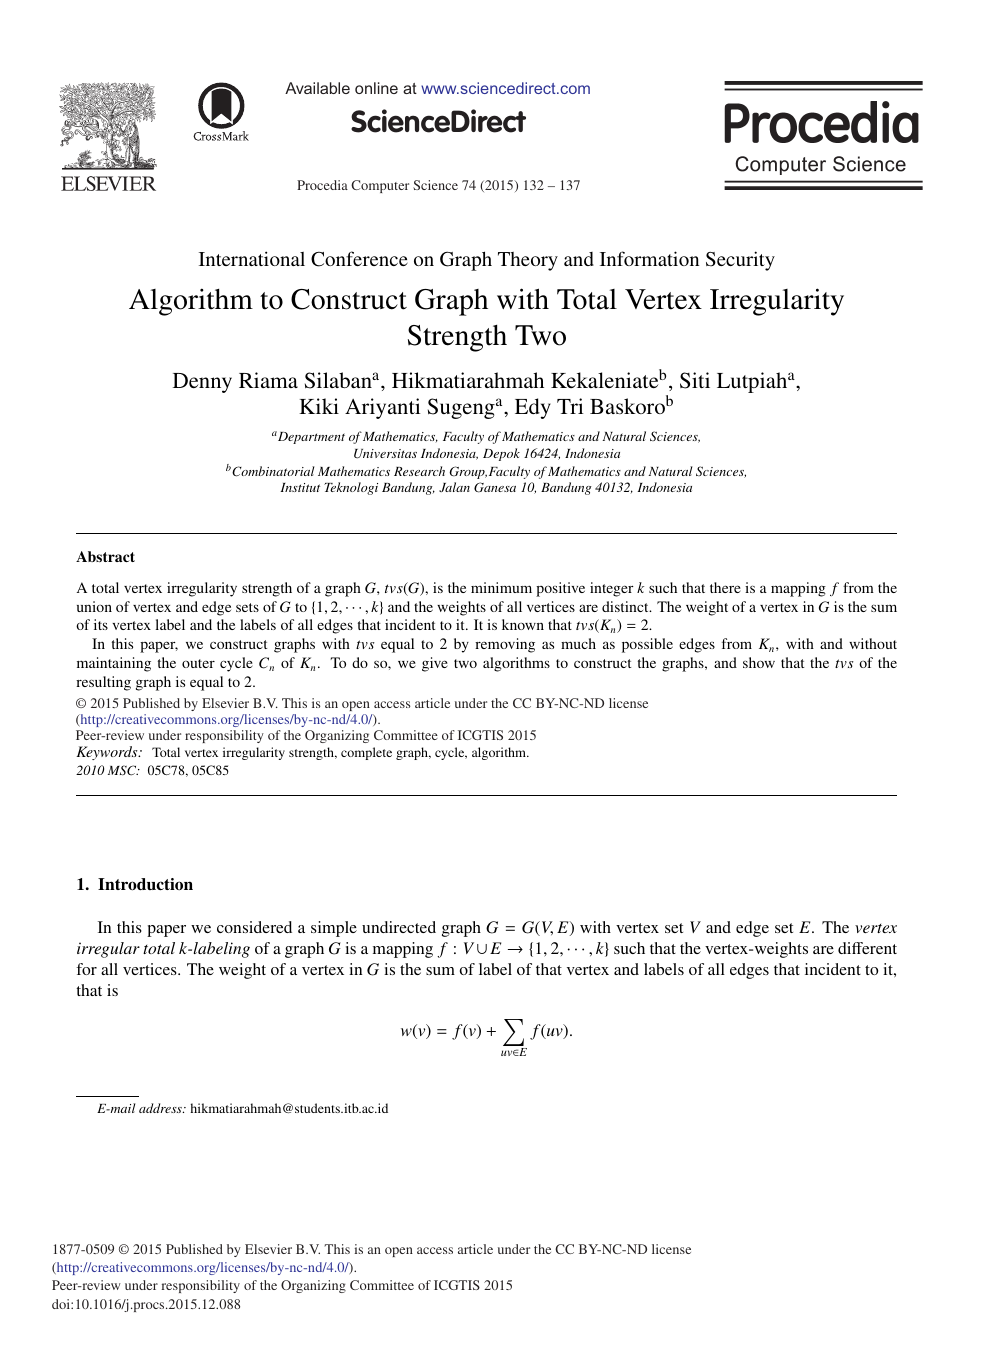 Algorithm To Construct Graph With Total Vertex Irregularity Strength Two Topic Of Research Paper In Computer And Information Sciences Download Scholarly Article Pdf And Read For Free On Cyberleninka Open Science